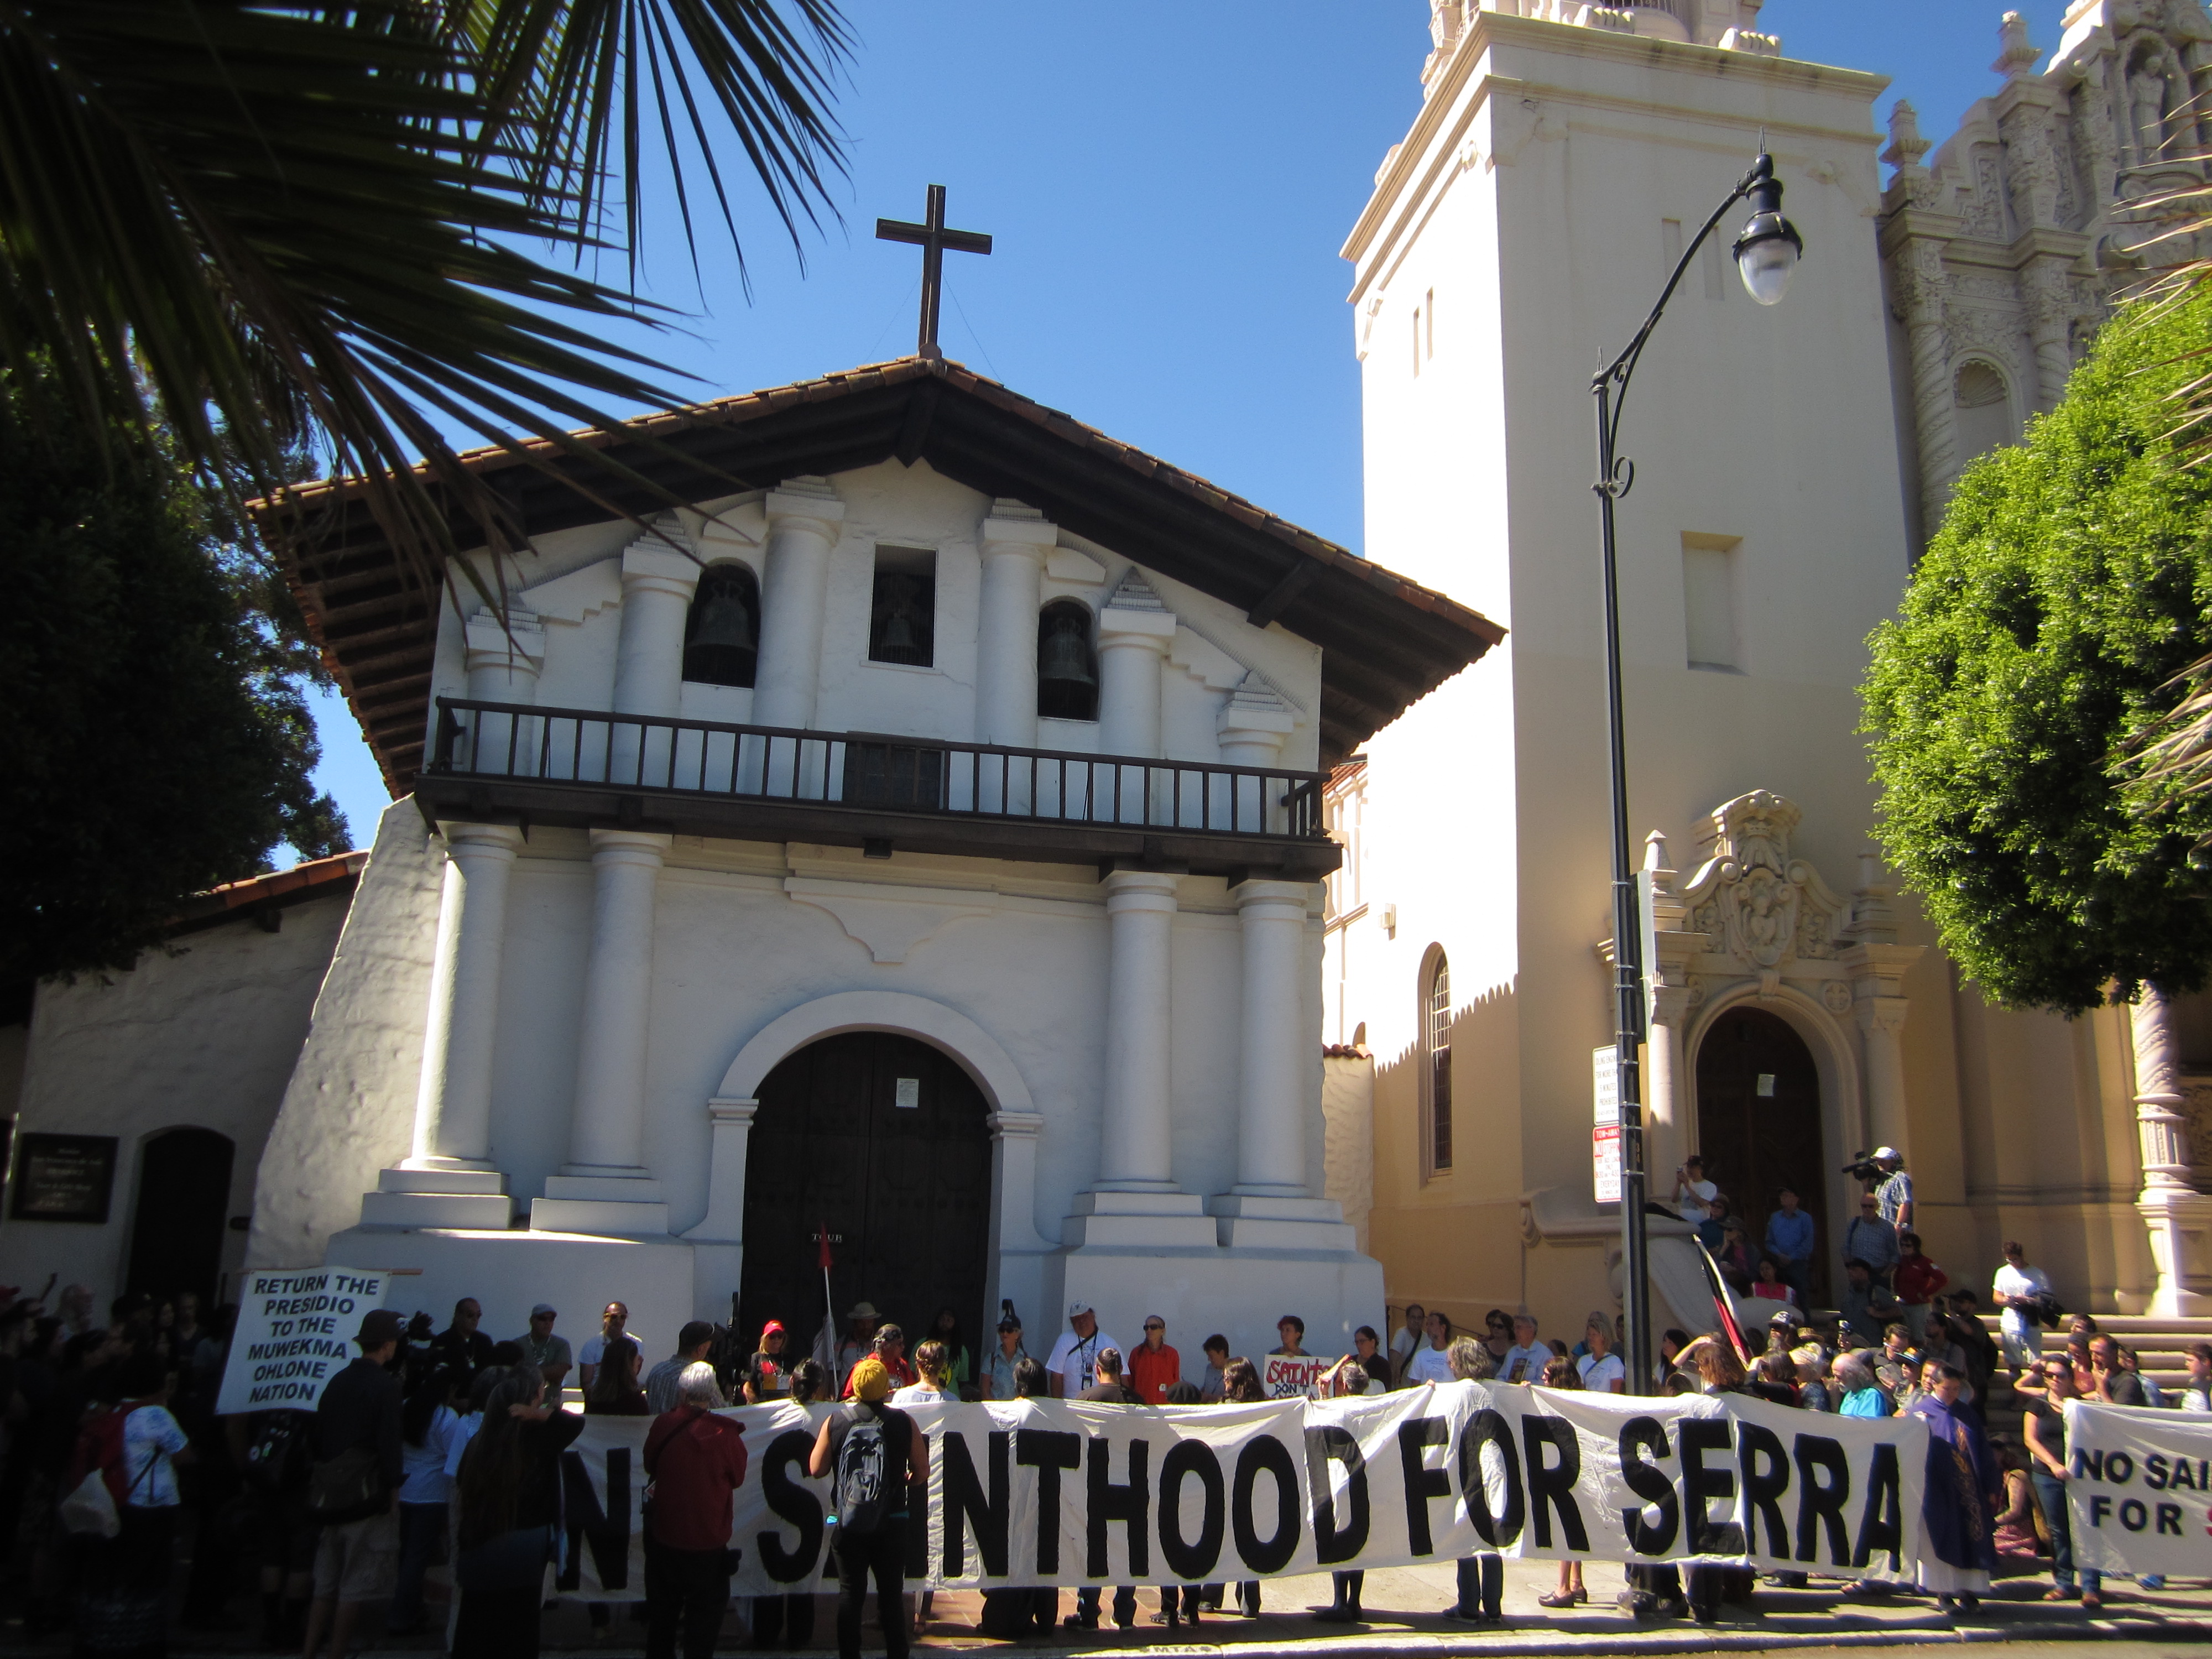 Protest at Mission Dolores, September 2015